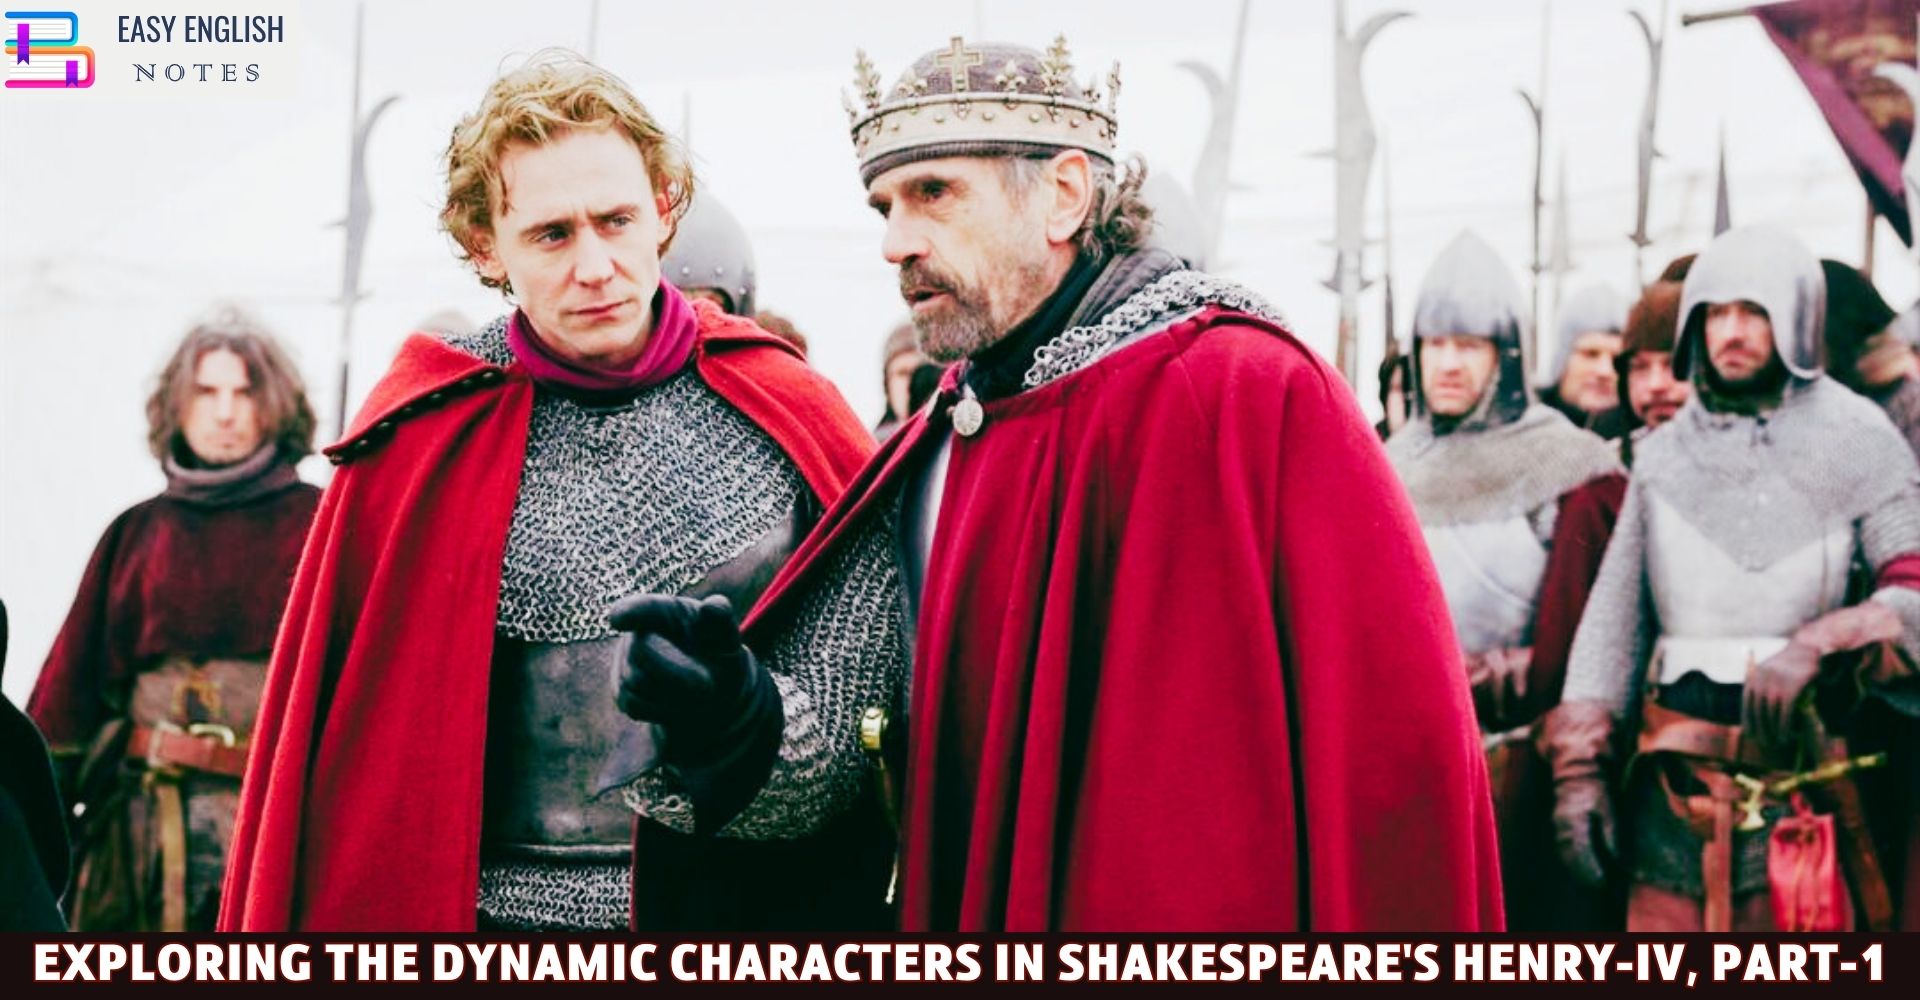 Exploring the Dynamic Characters in Shakespeare's Henry-IV, Part-1